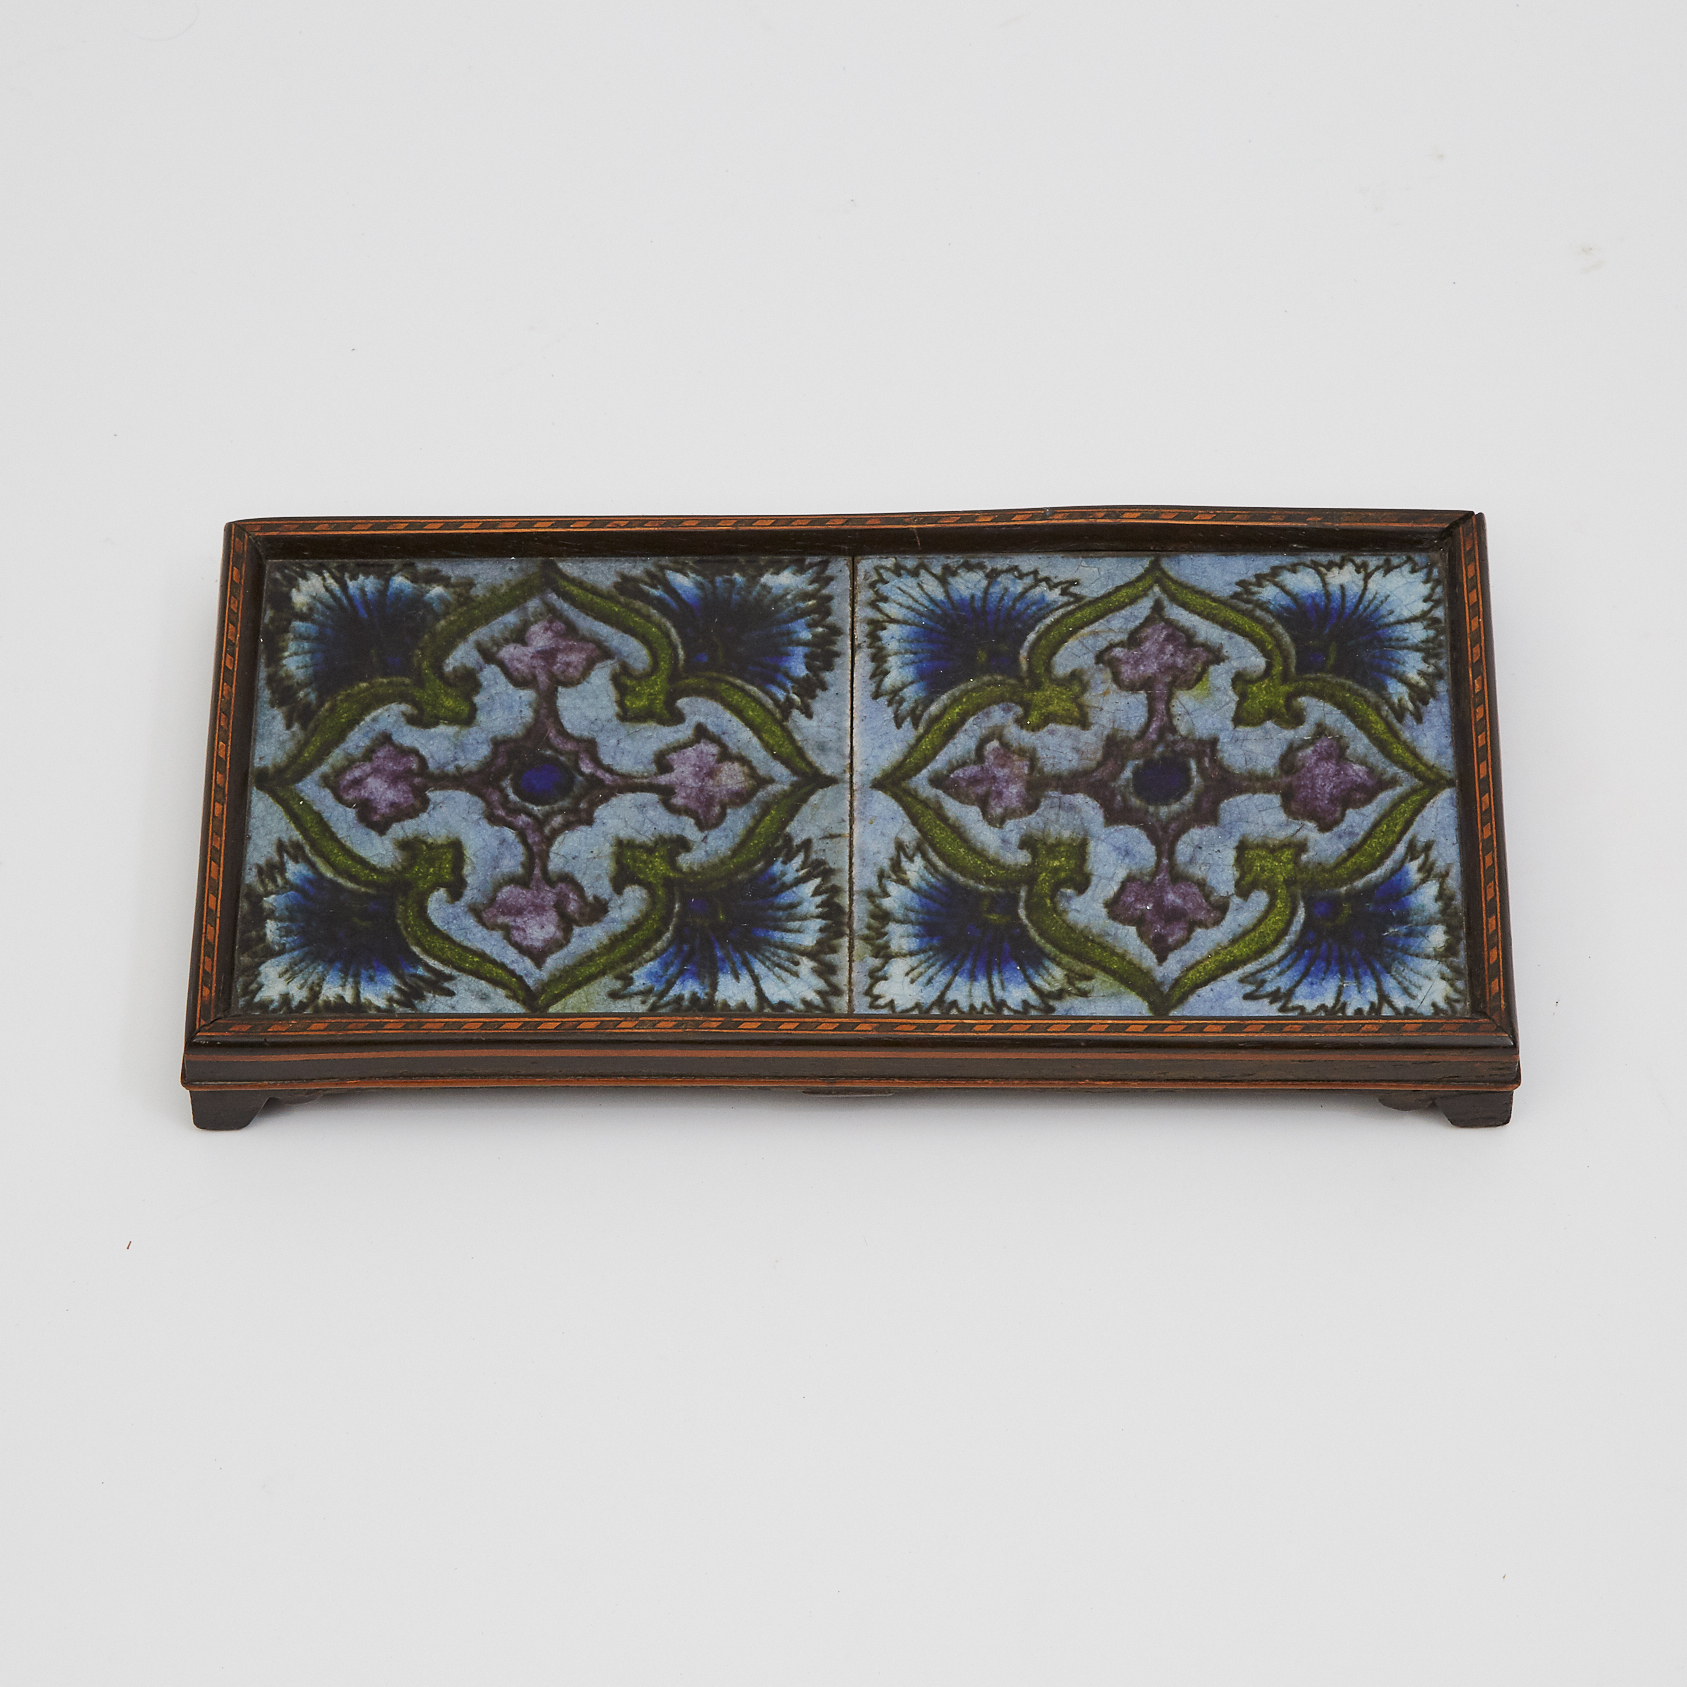 English Pottery Two-Tile Trivet, possibly William de Morgan, late 19th century